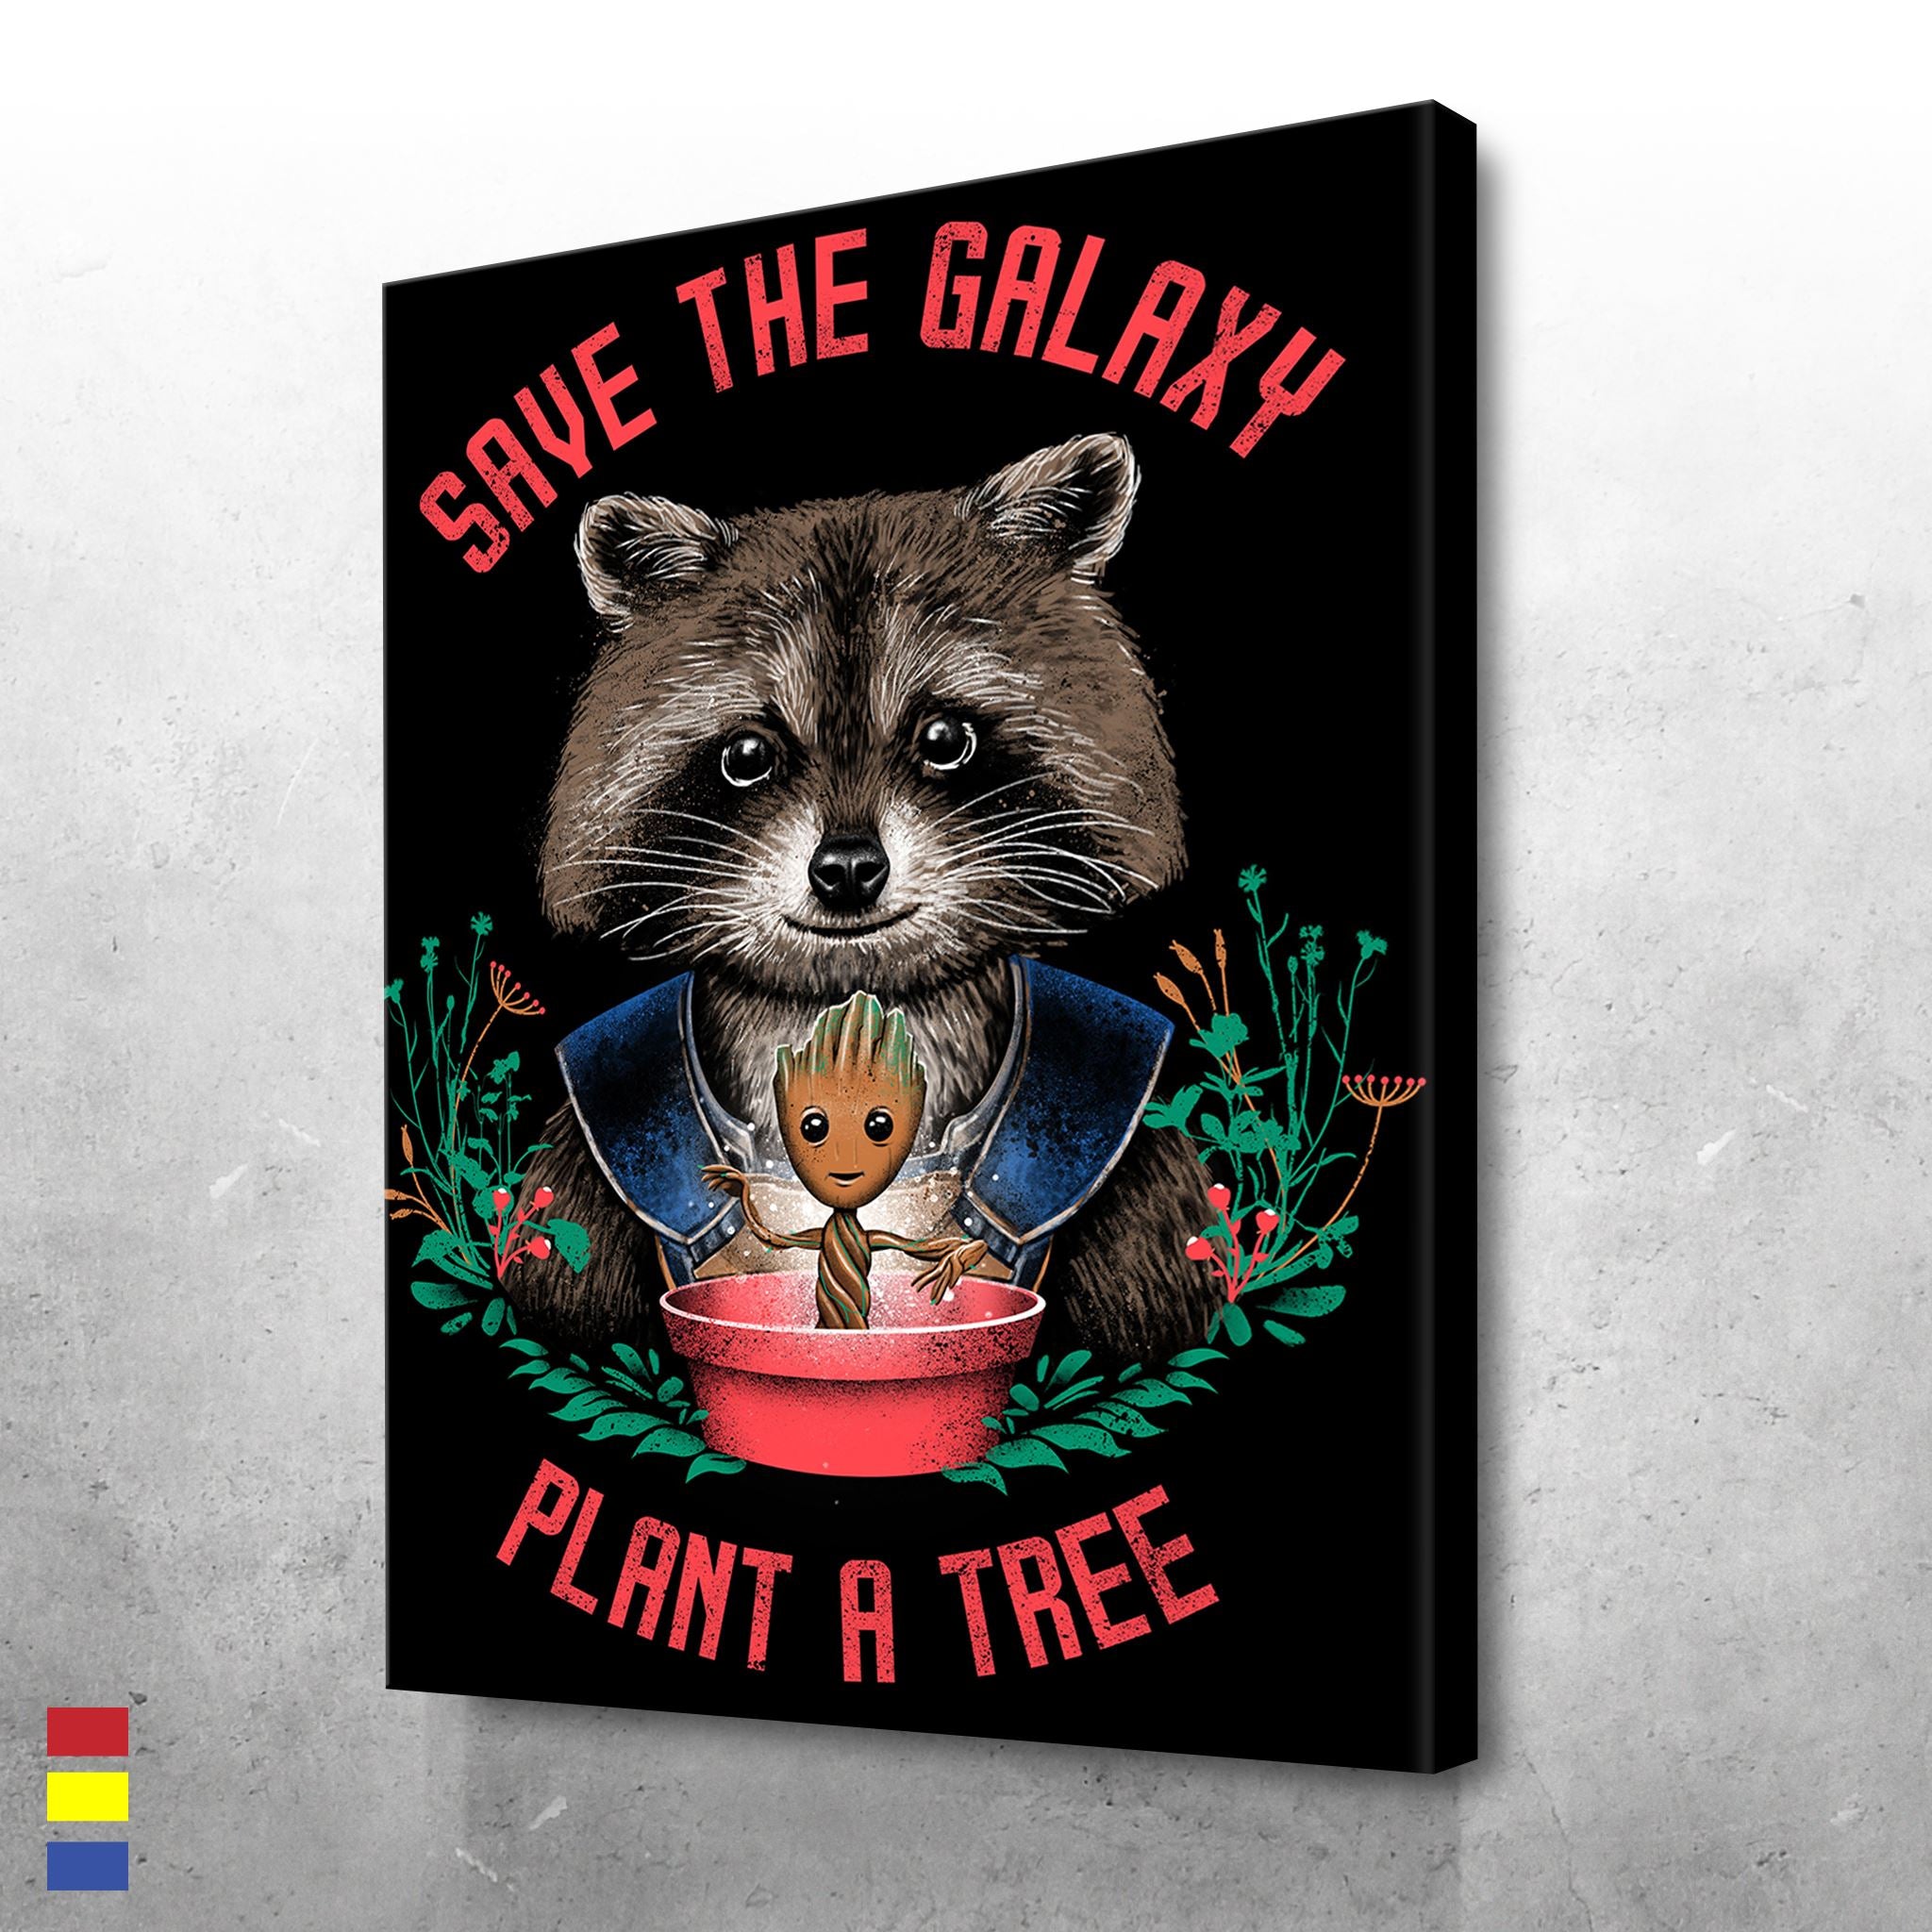 Save the Galaxy Plant a Tree